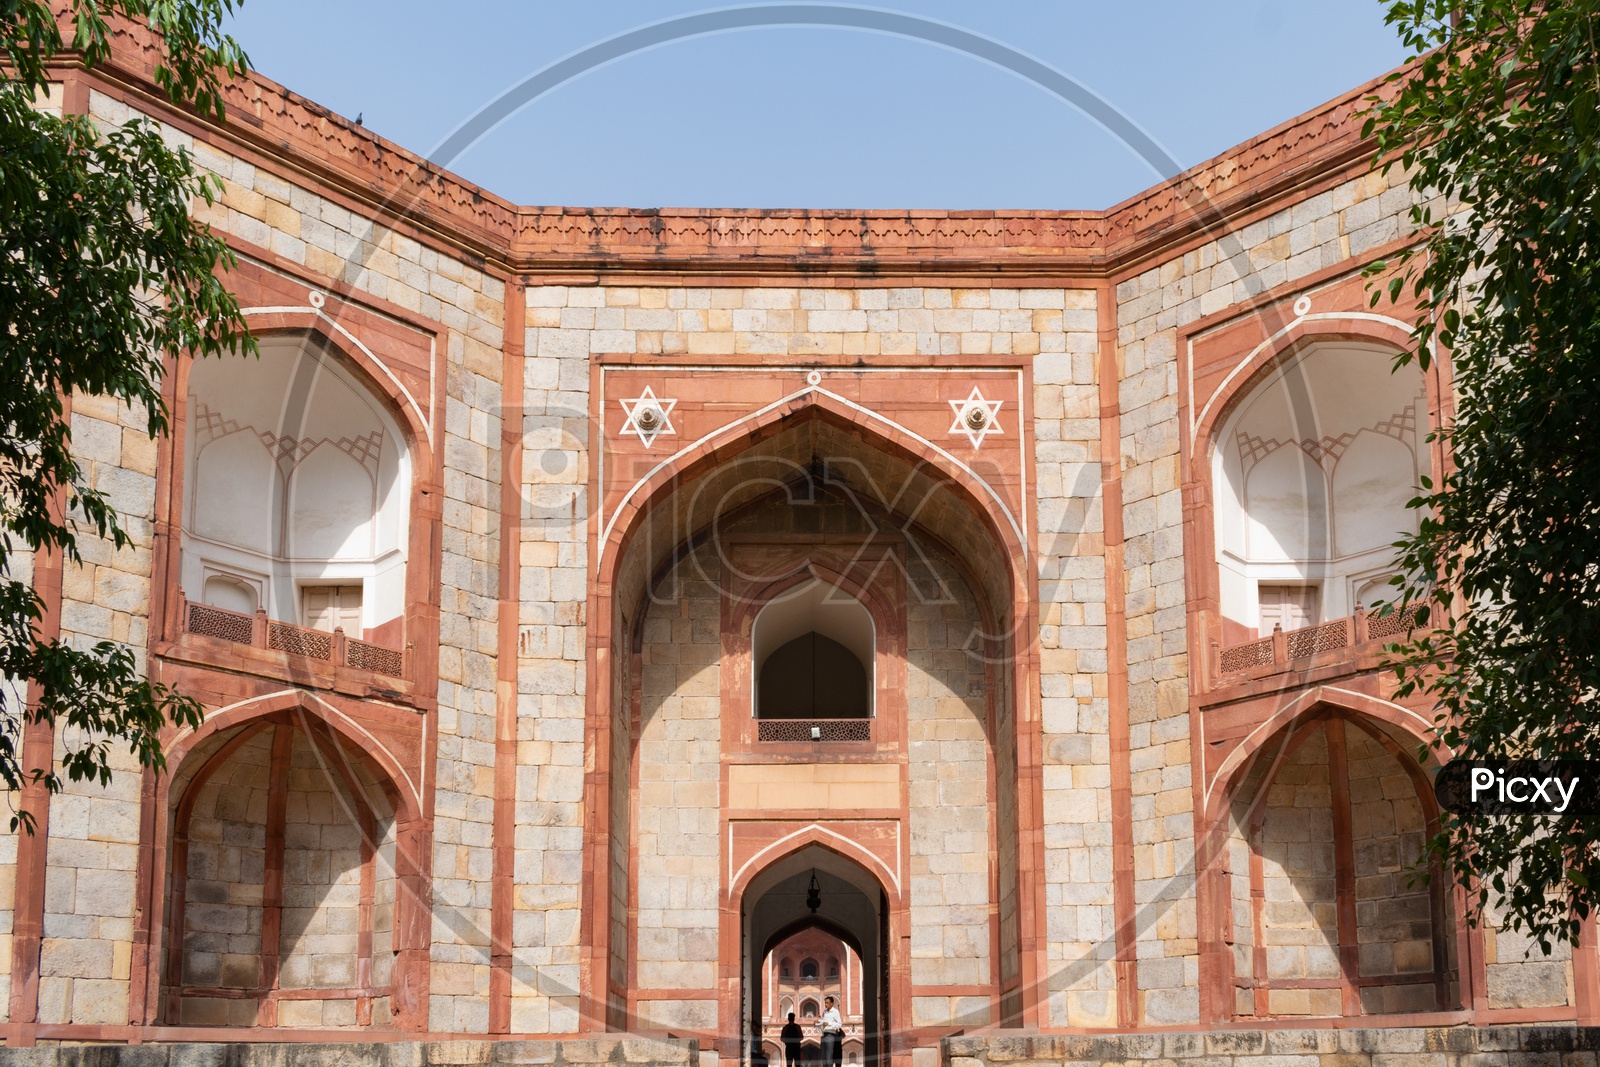 West Gate to enter Humayun's Tomb